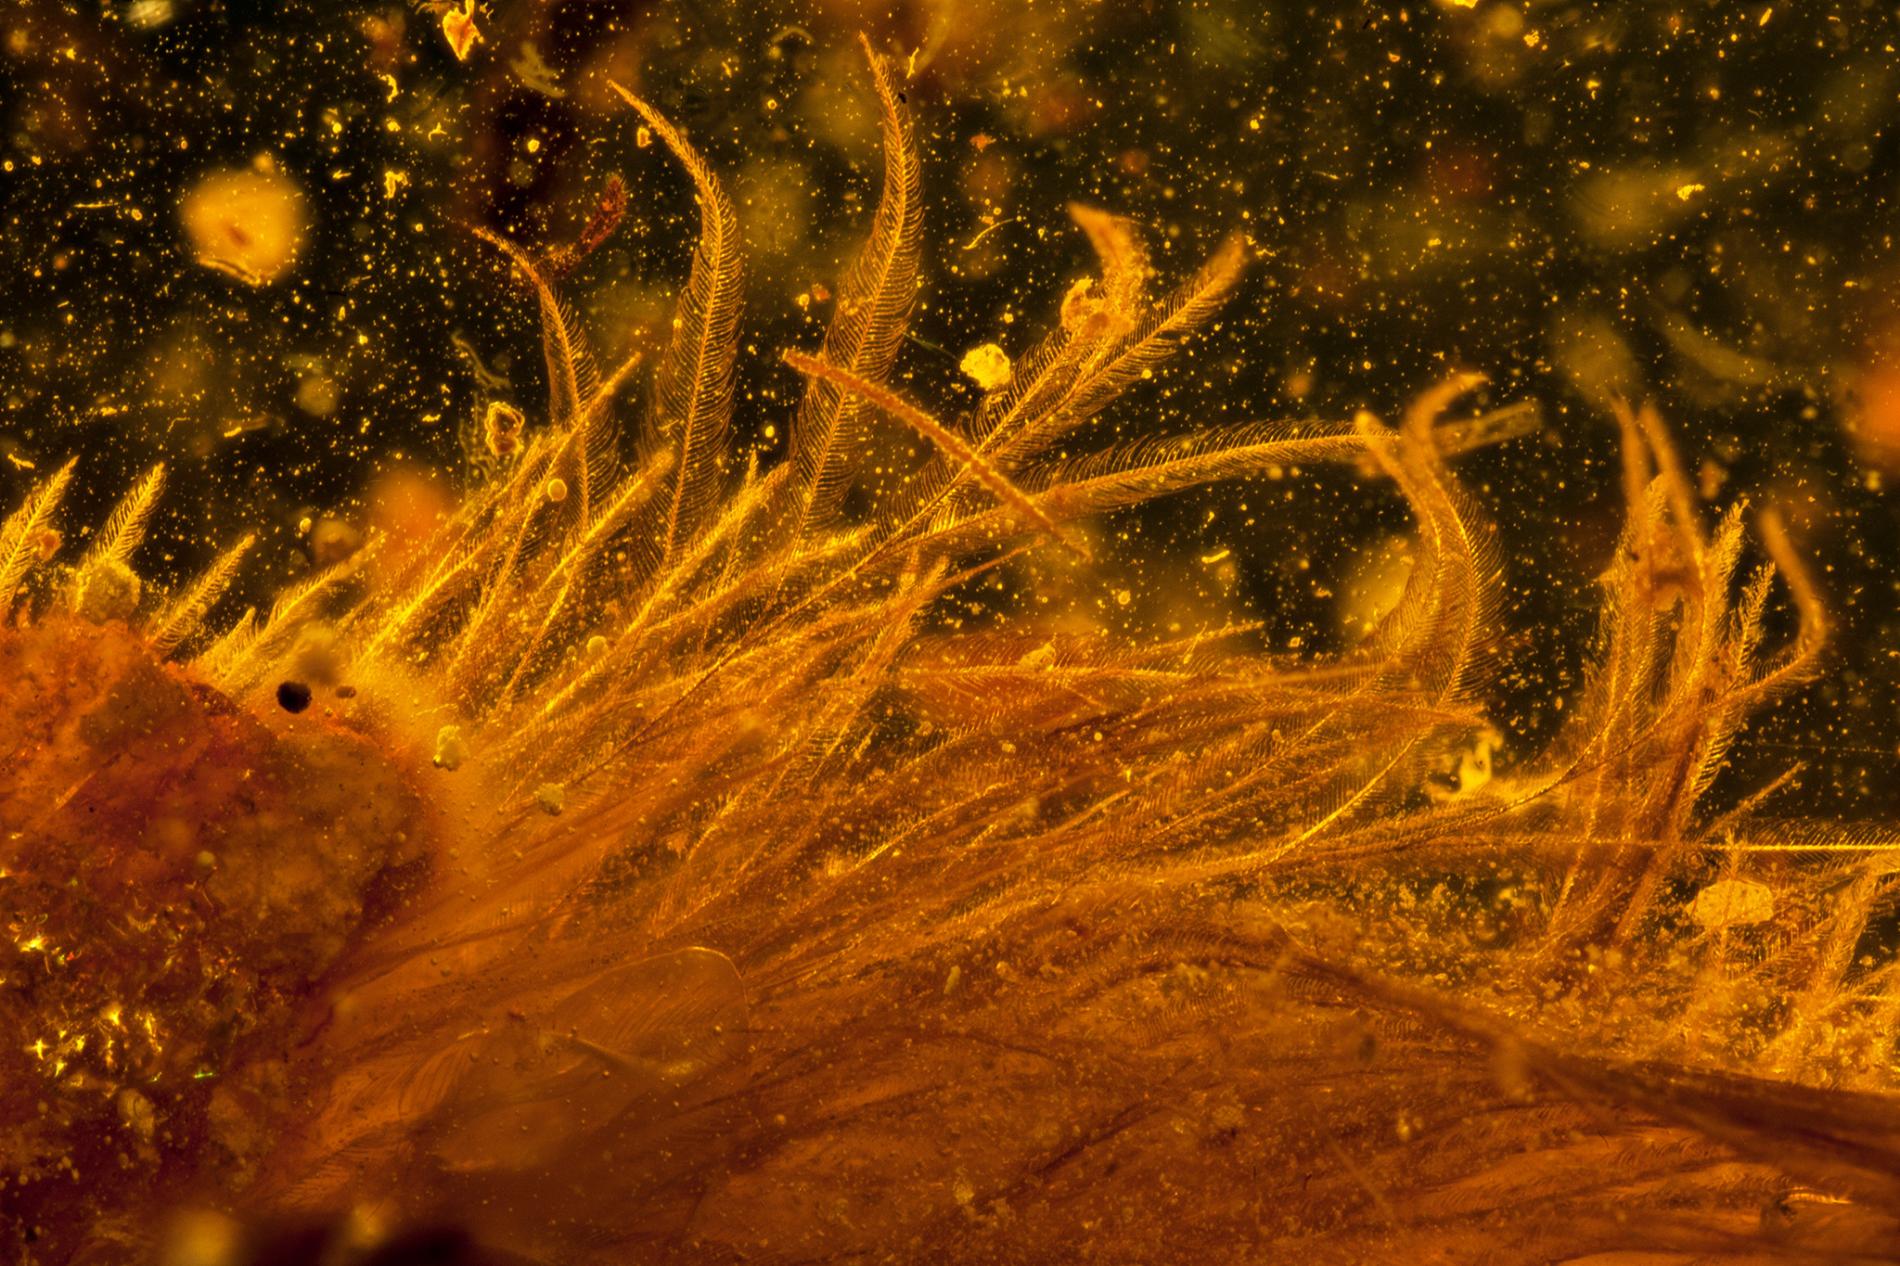 Close-up of dinosaur tail in amber